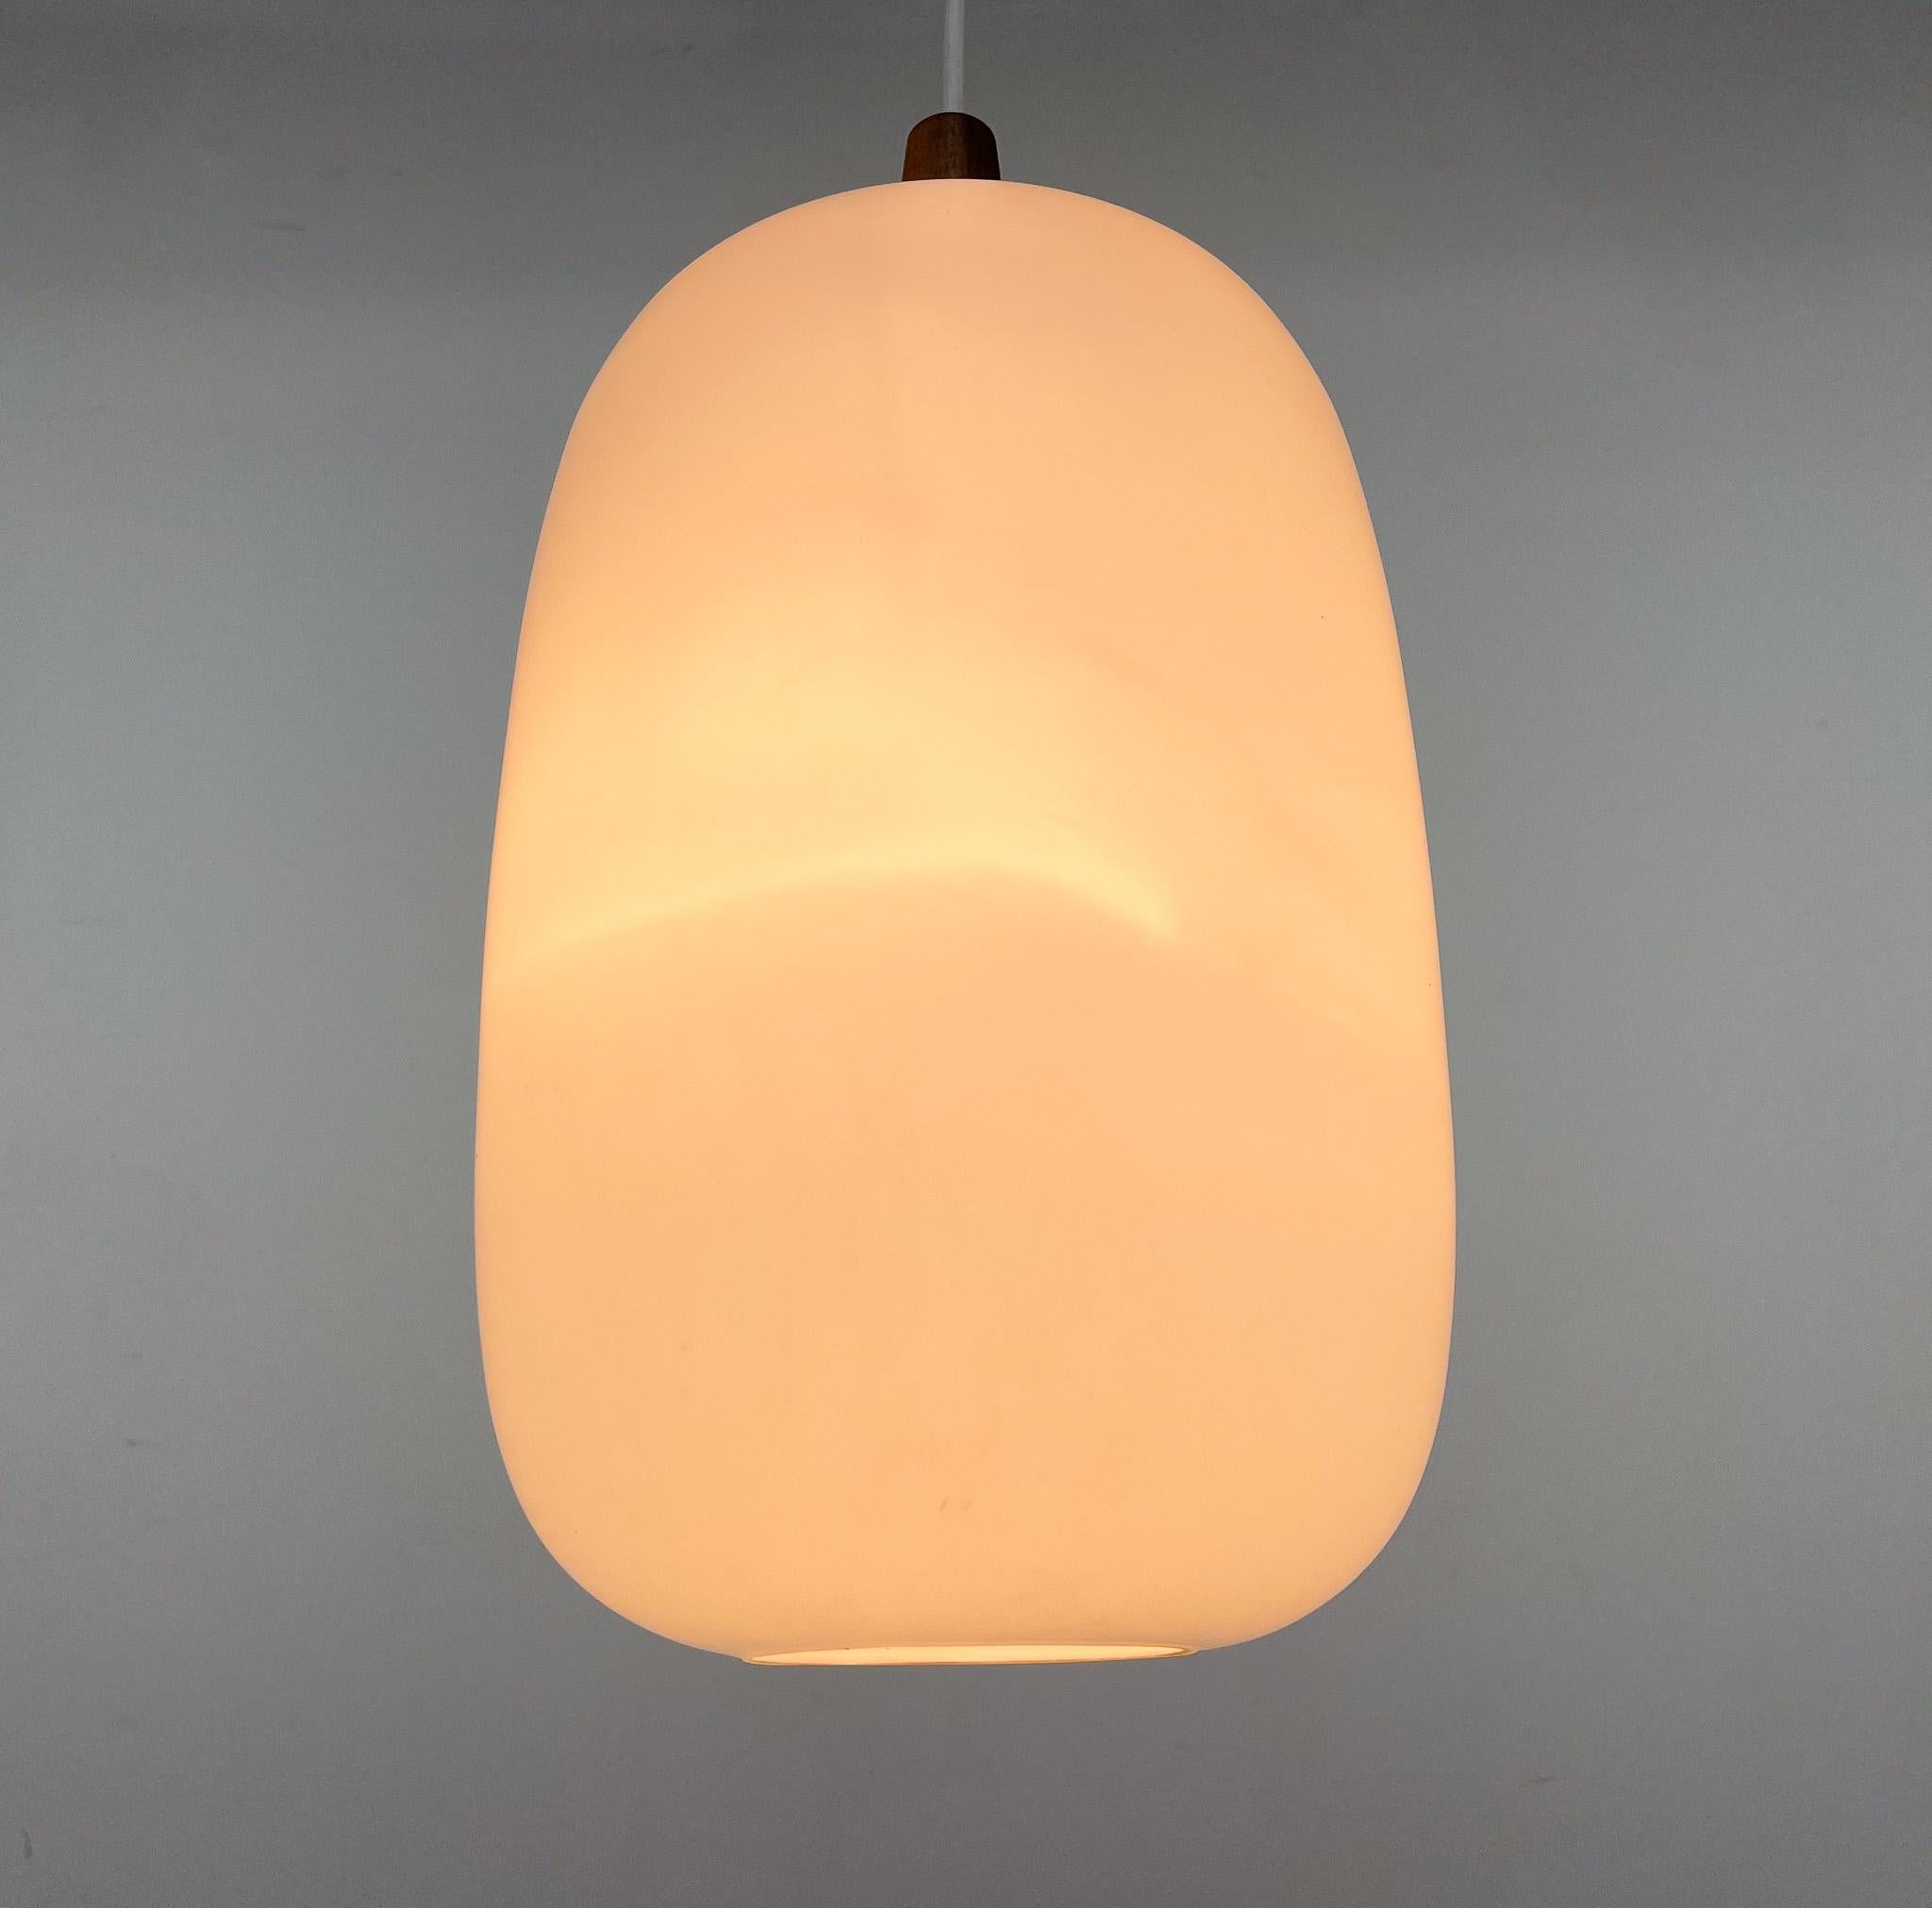 1960s Wood and Glass Pendant Light by ULUV, Czechoslovakia, Marked by Manufactur For Sale 4